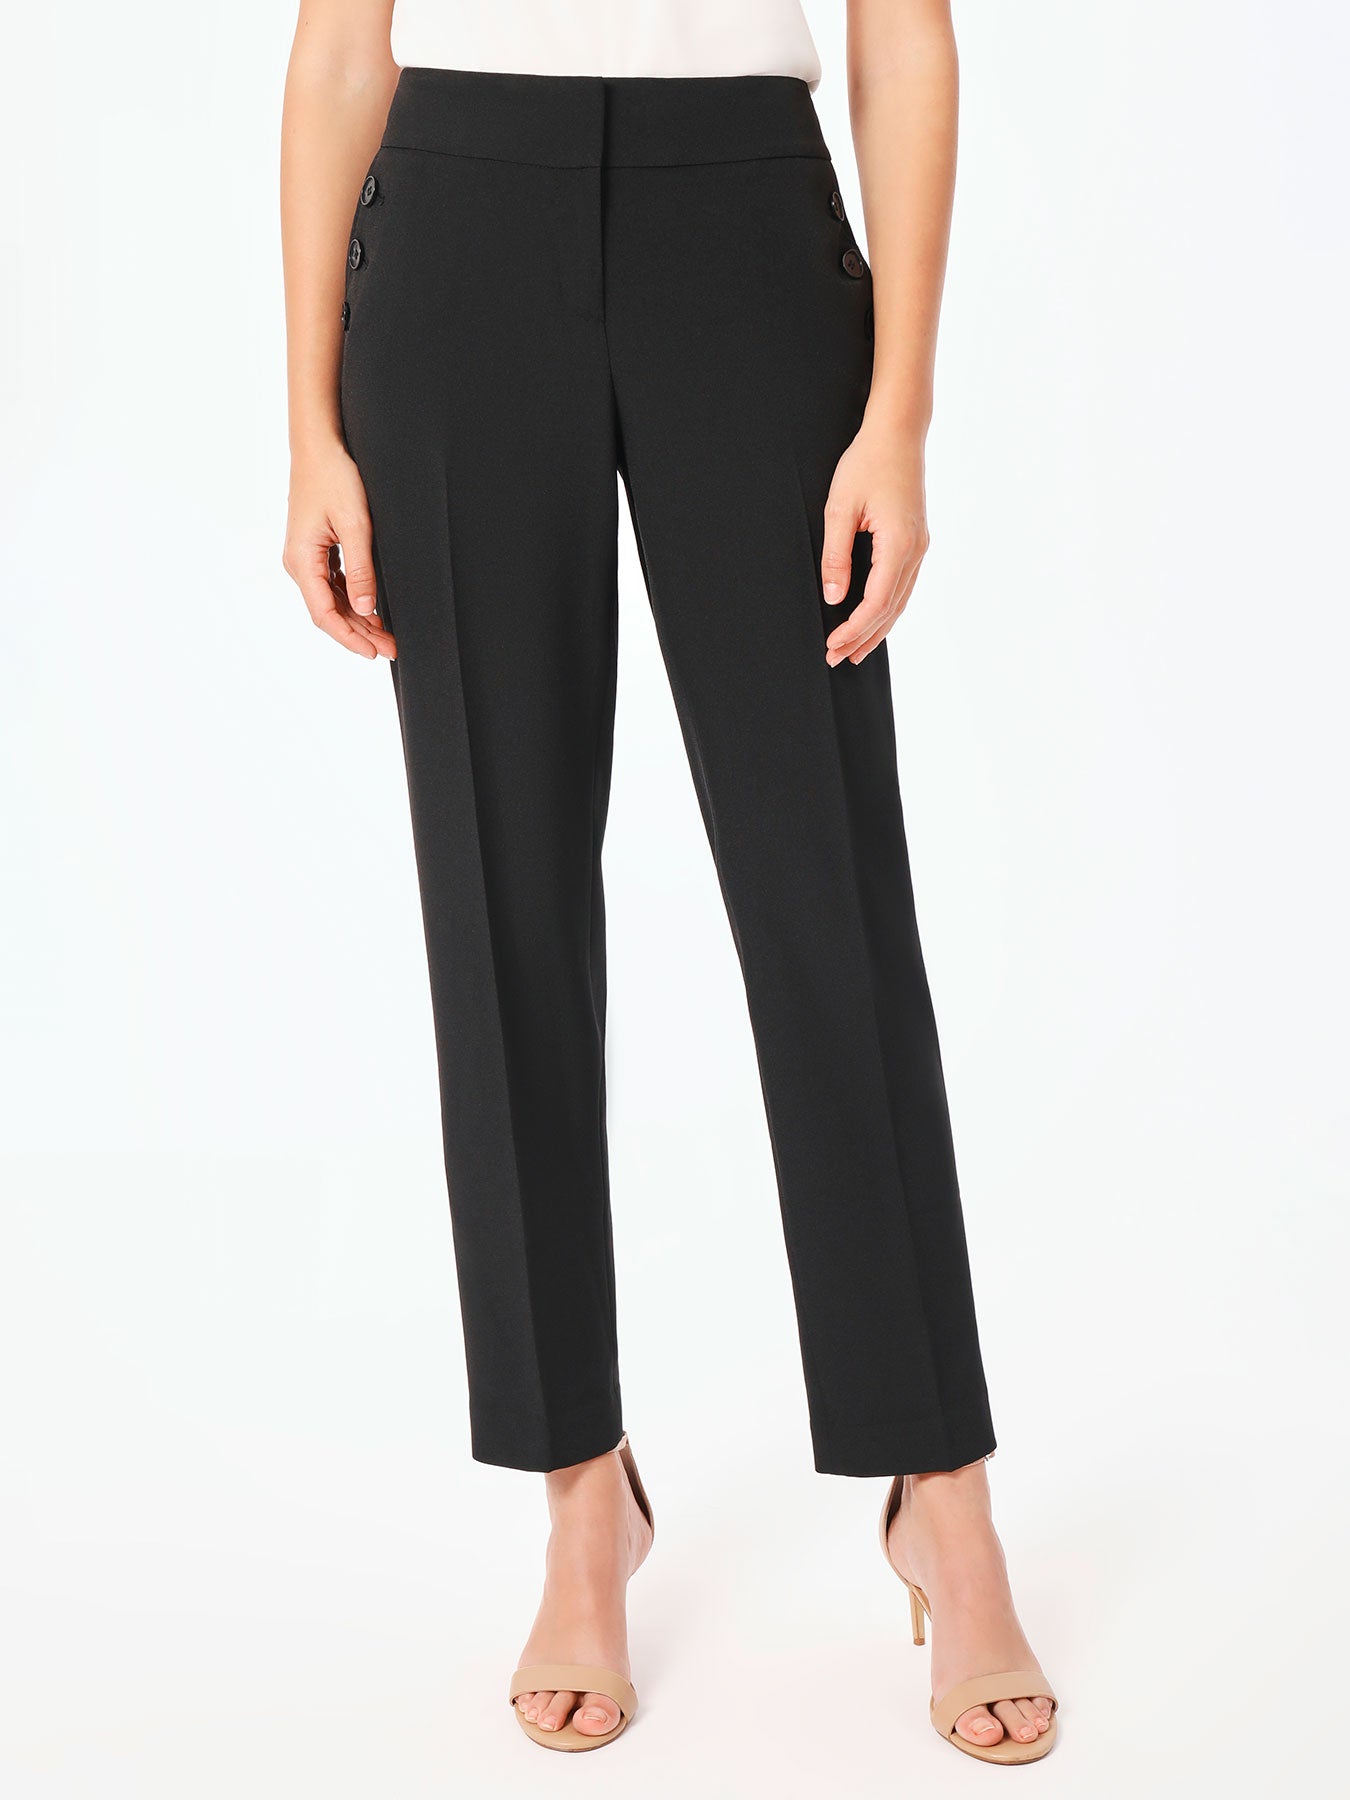 Tips For Styling Wide-Leg Cropped Pants - Kristy By The Sea  Wide leg  cropped pants, Cropped pants, Cropped wide leg pants